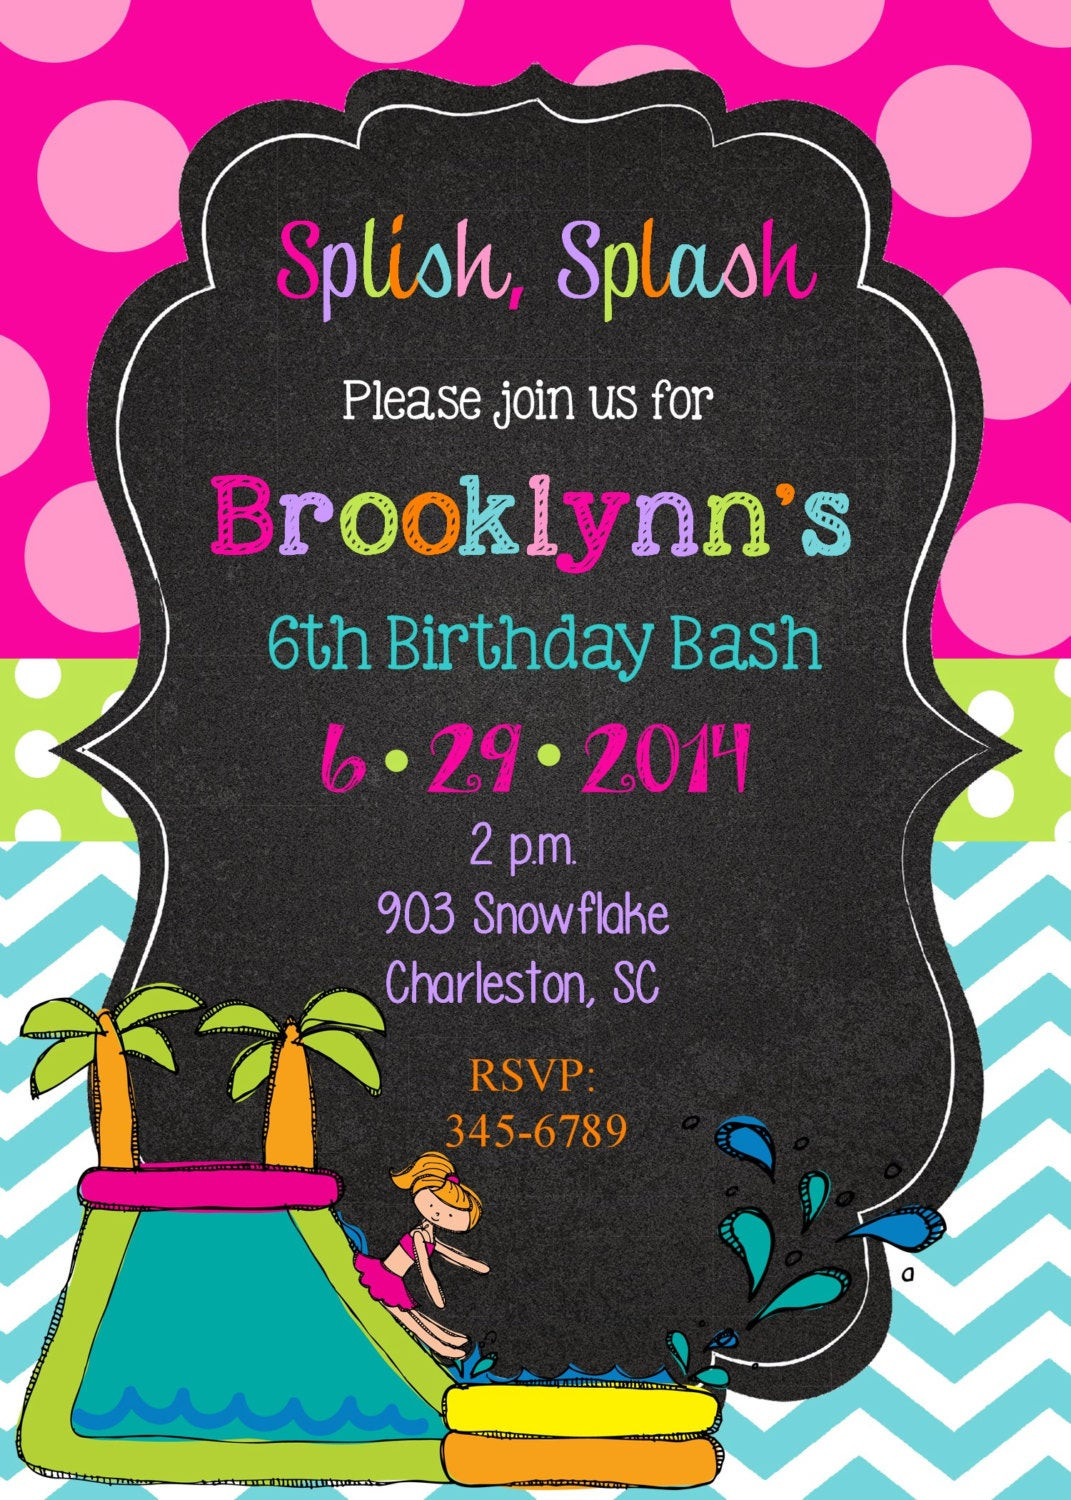 Water Birthday Party
 Water Slide Party Birthday Party invitations printable or